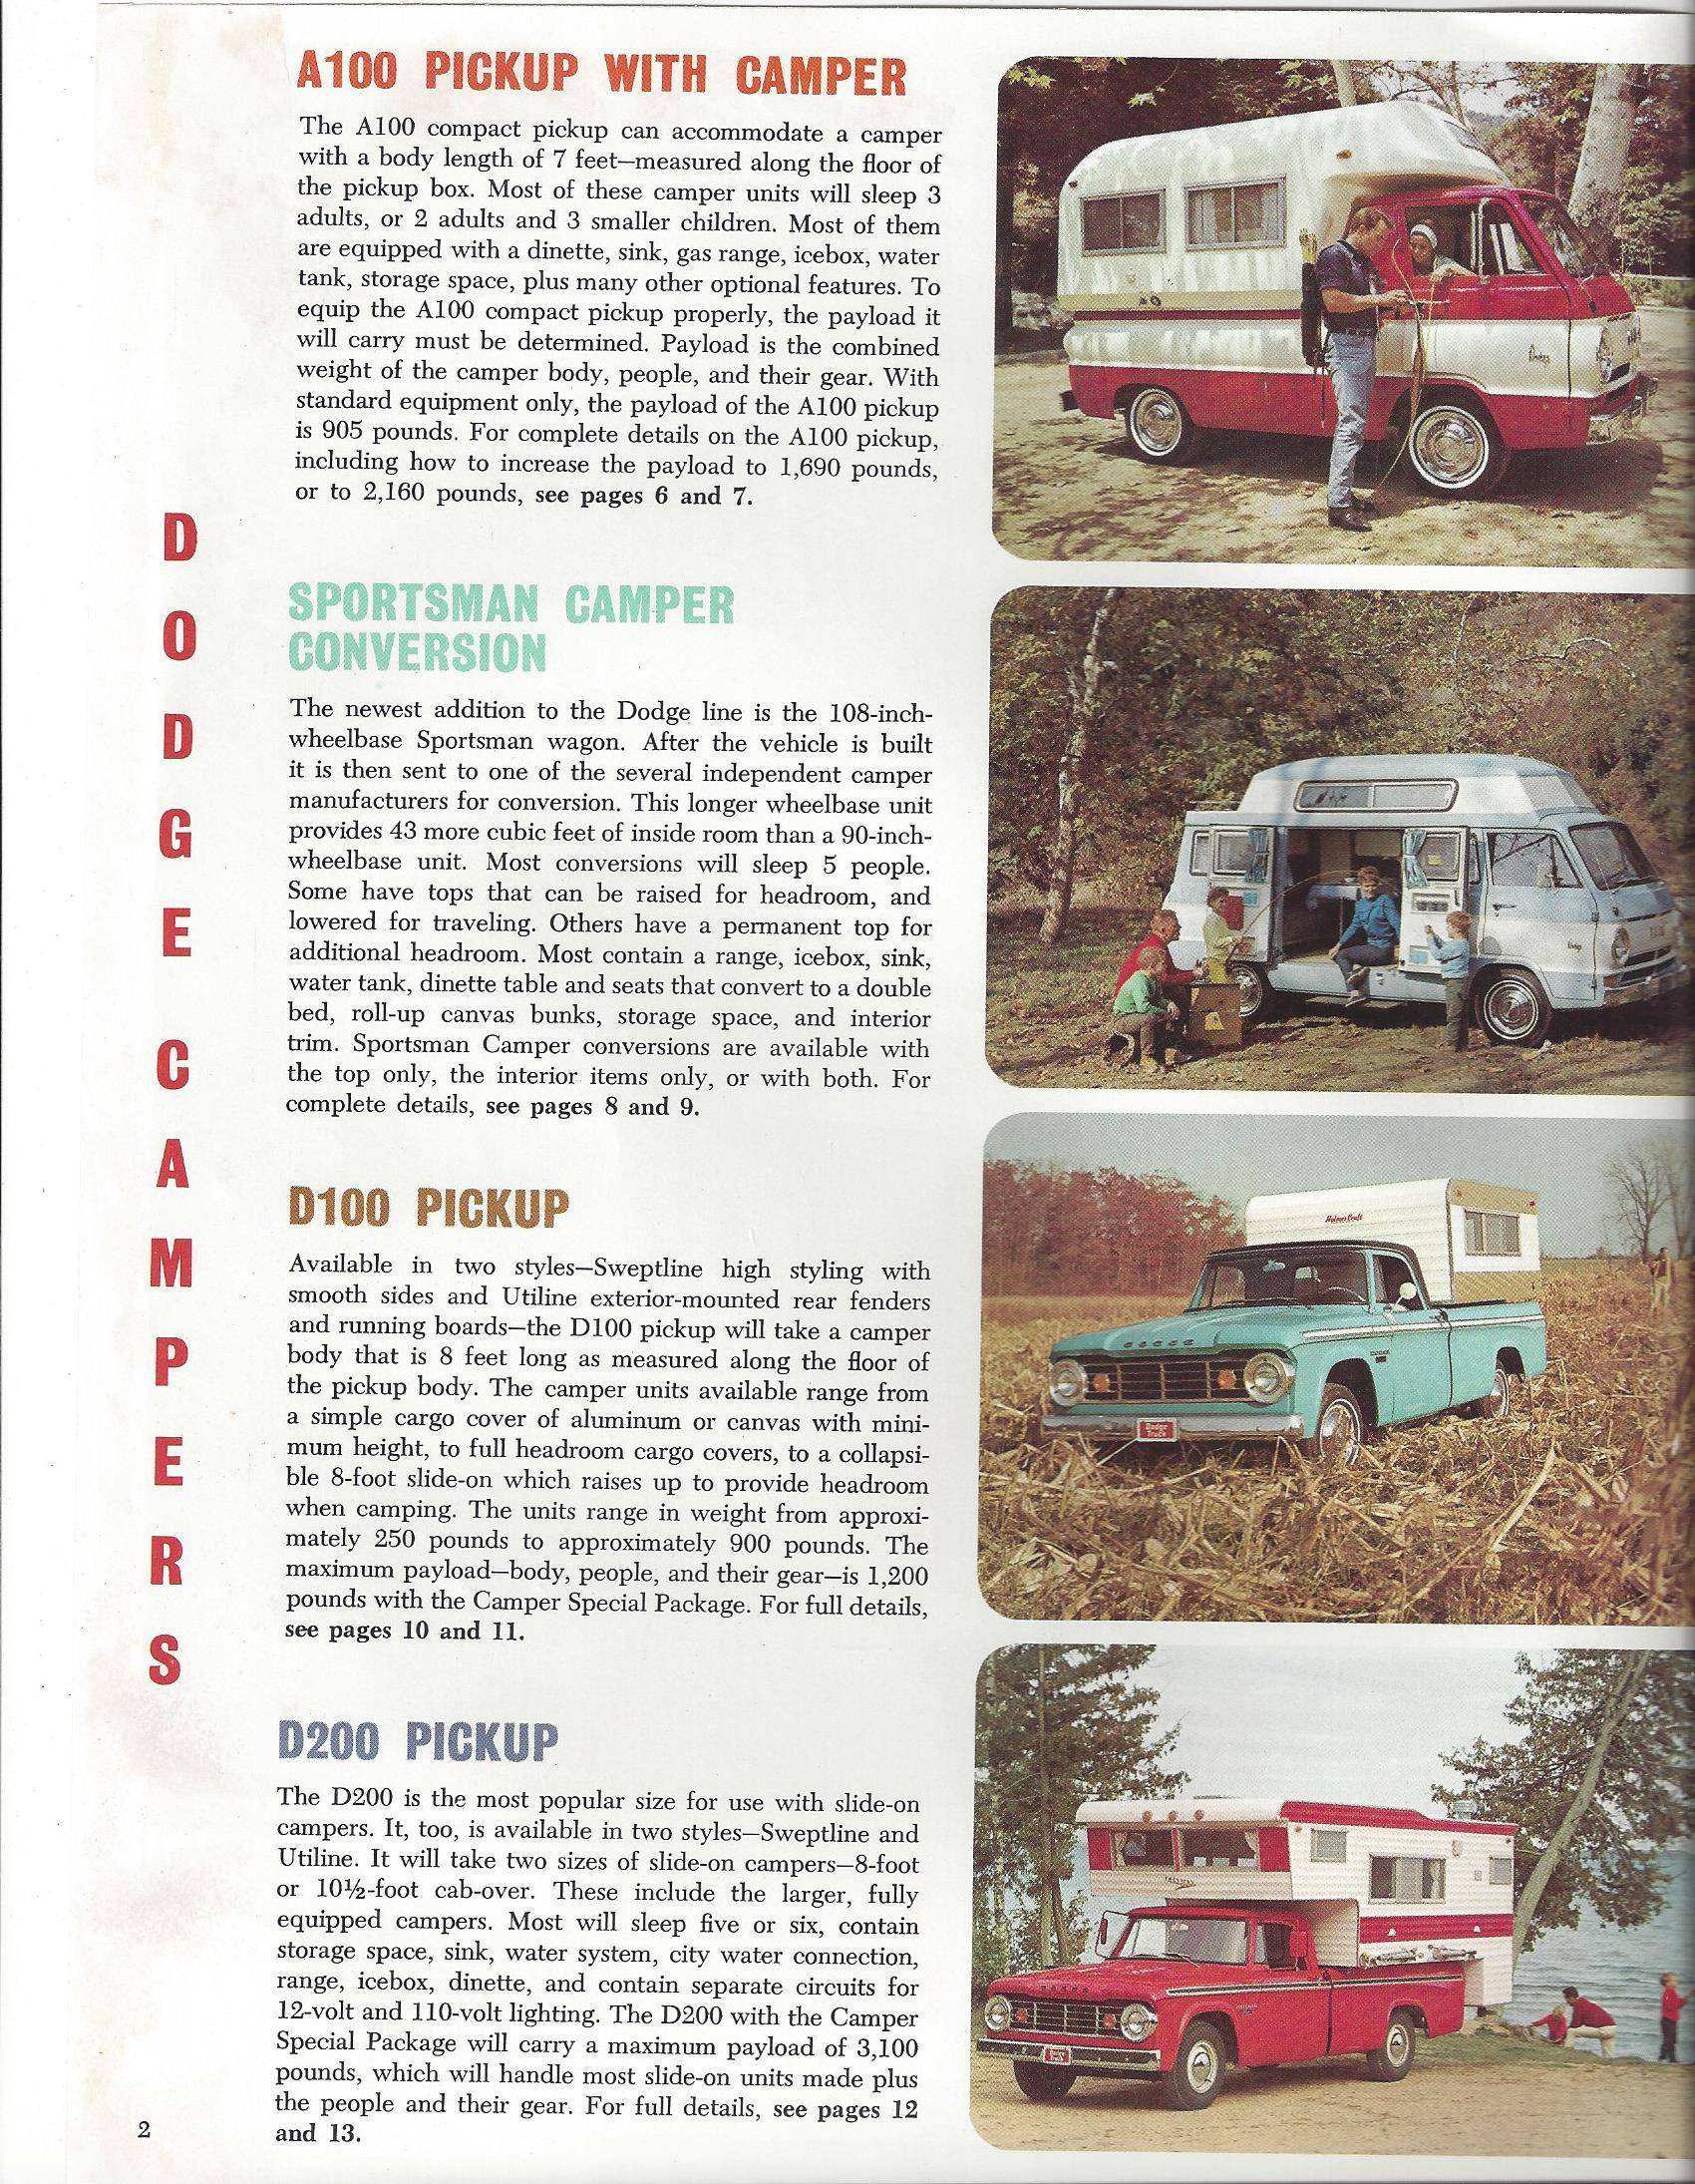 Go Camping With Dodge - pg 02.jpg